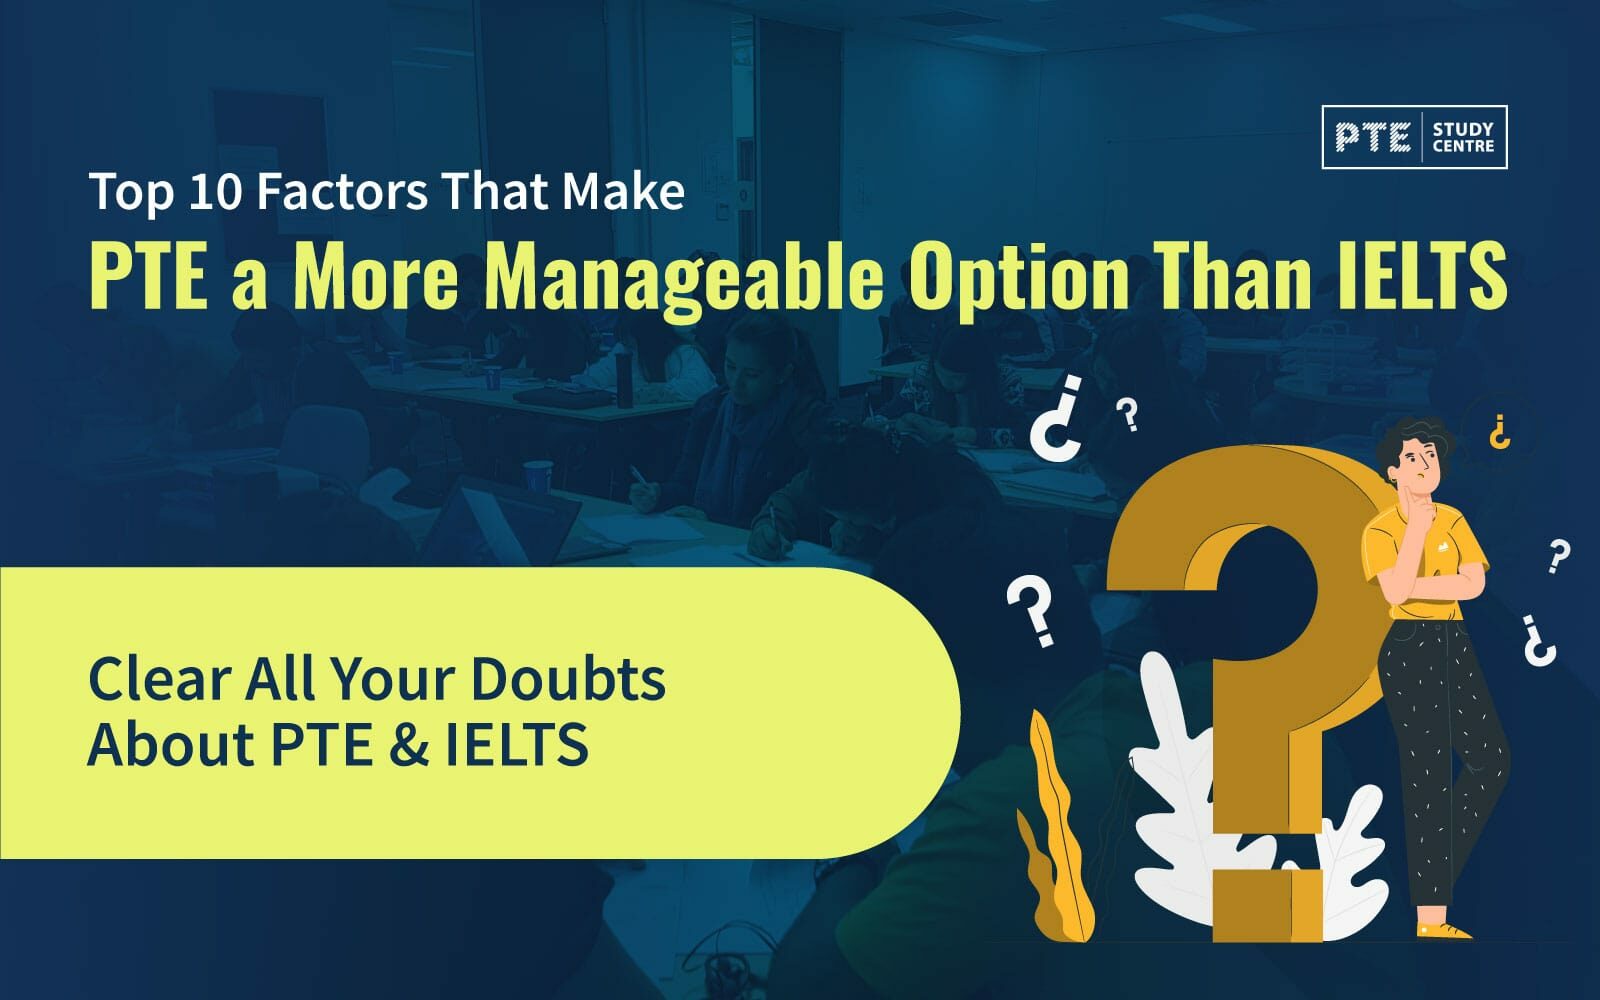 Top 10 Factors That Make PTE a More Manageable Option Than IELTS image